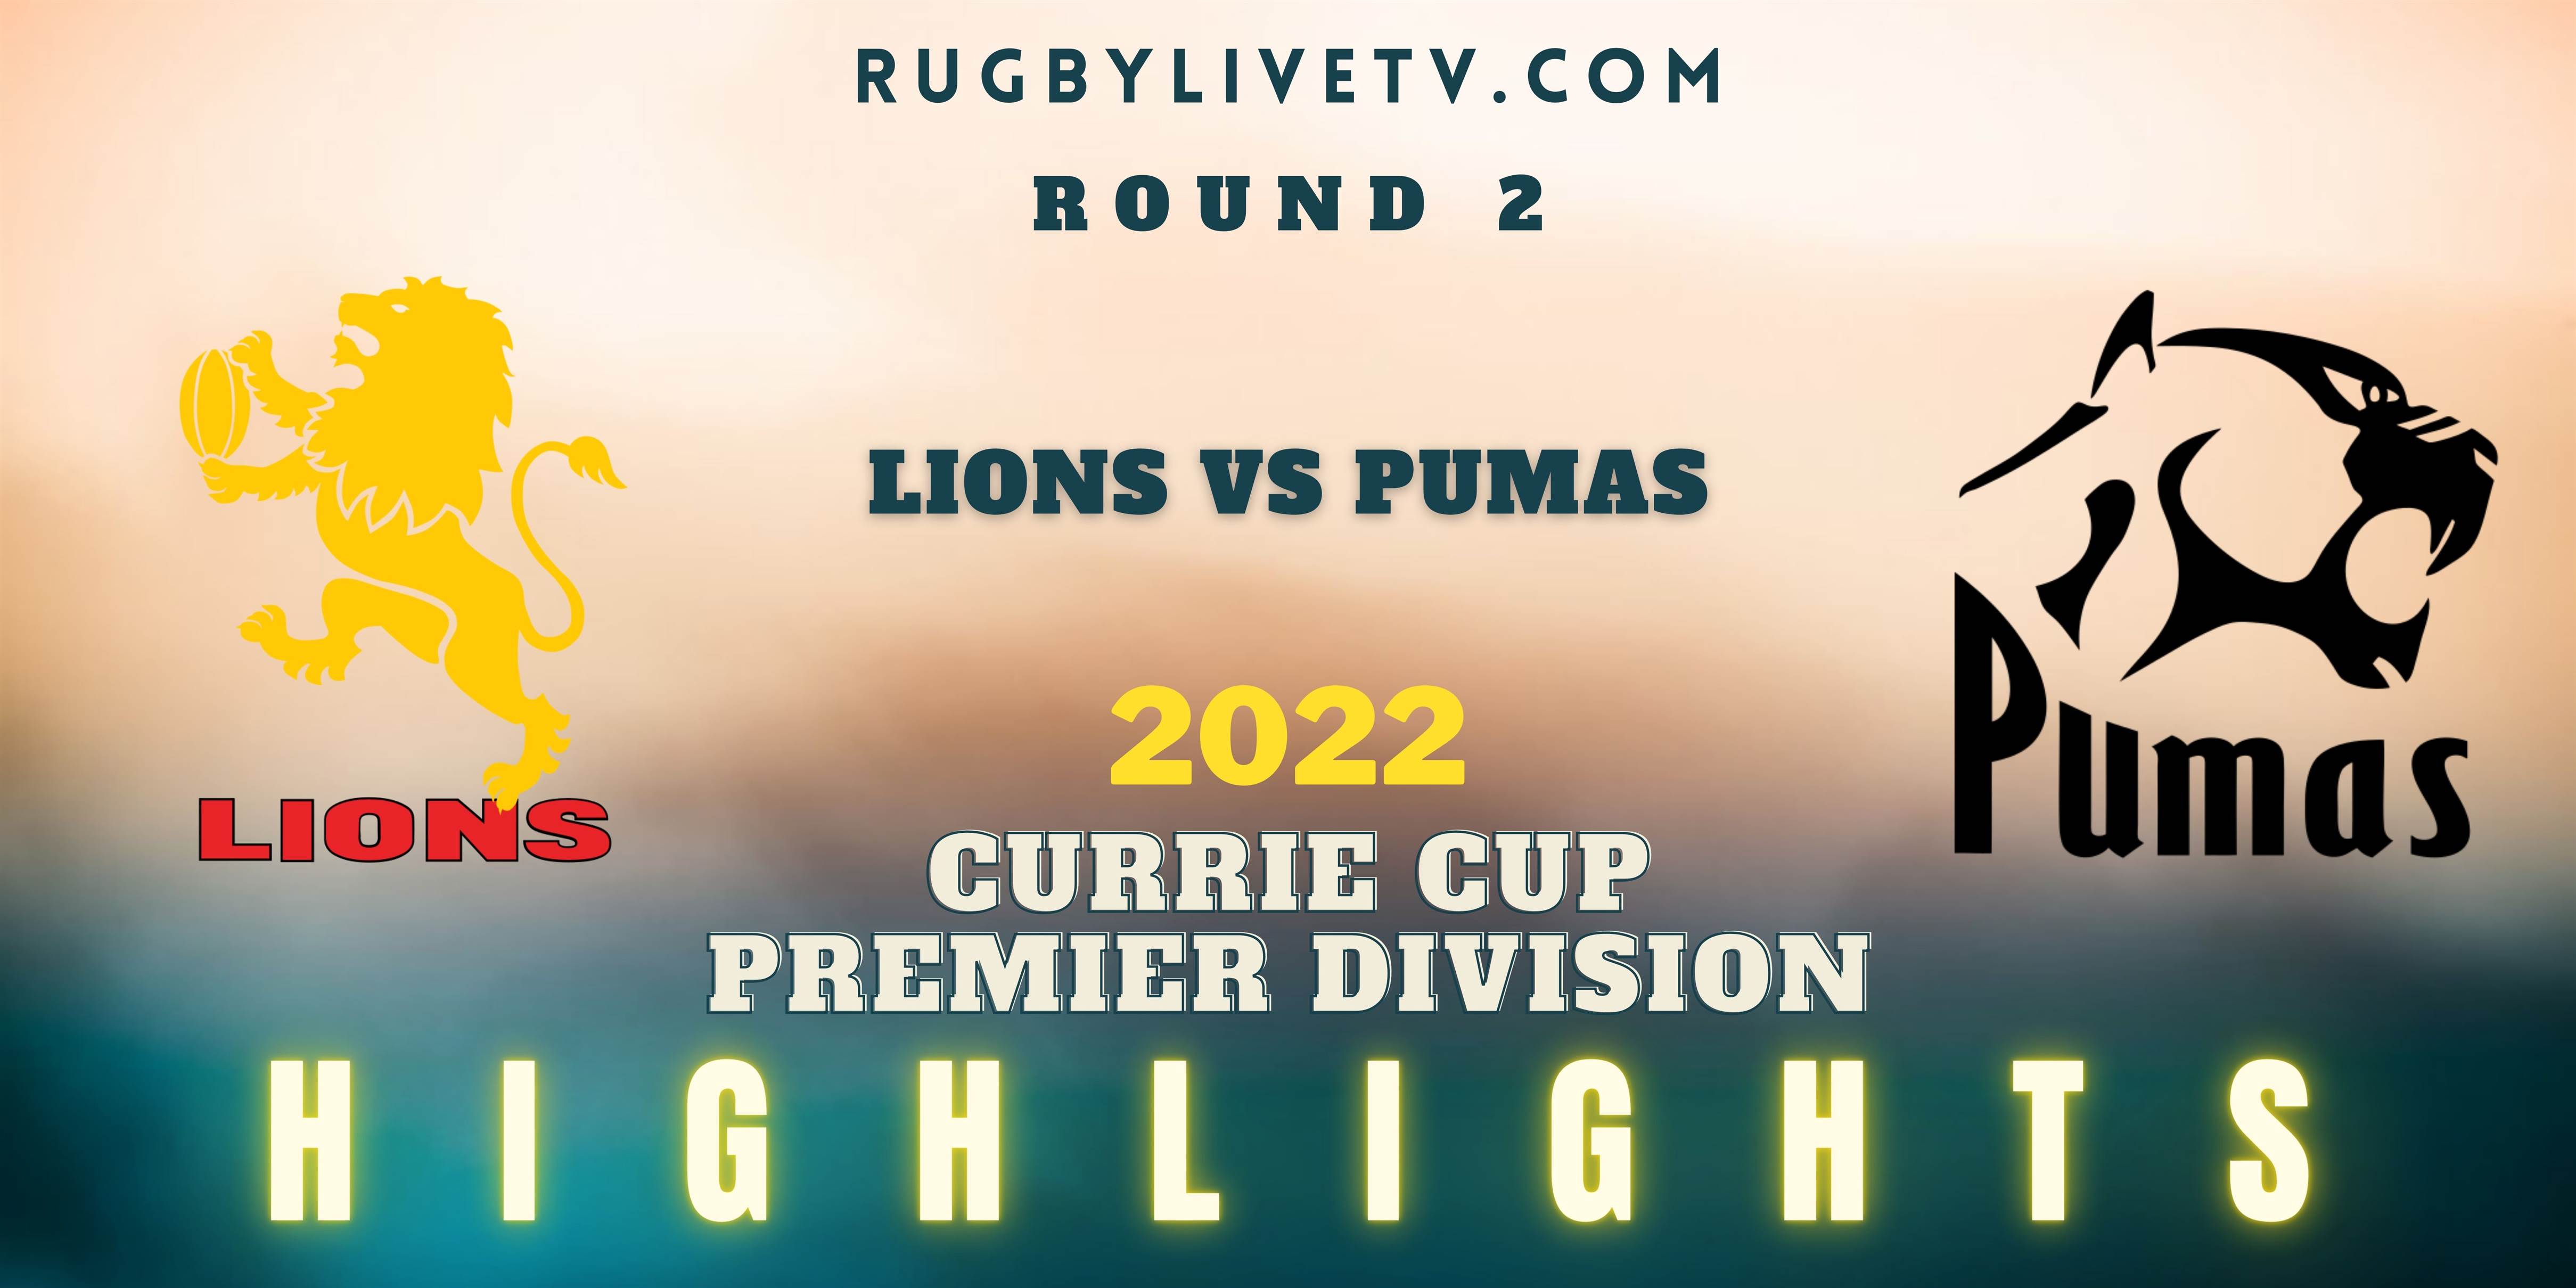 Lions Vs Pumas Currie Cup Highlights 2022 Rd 2